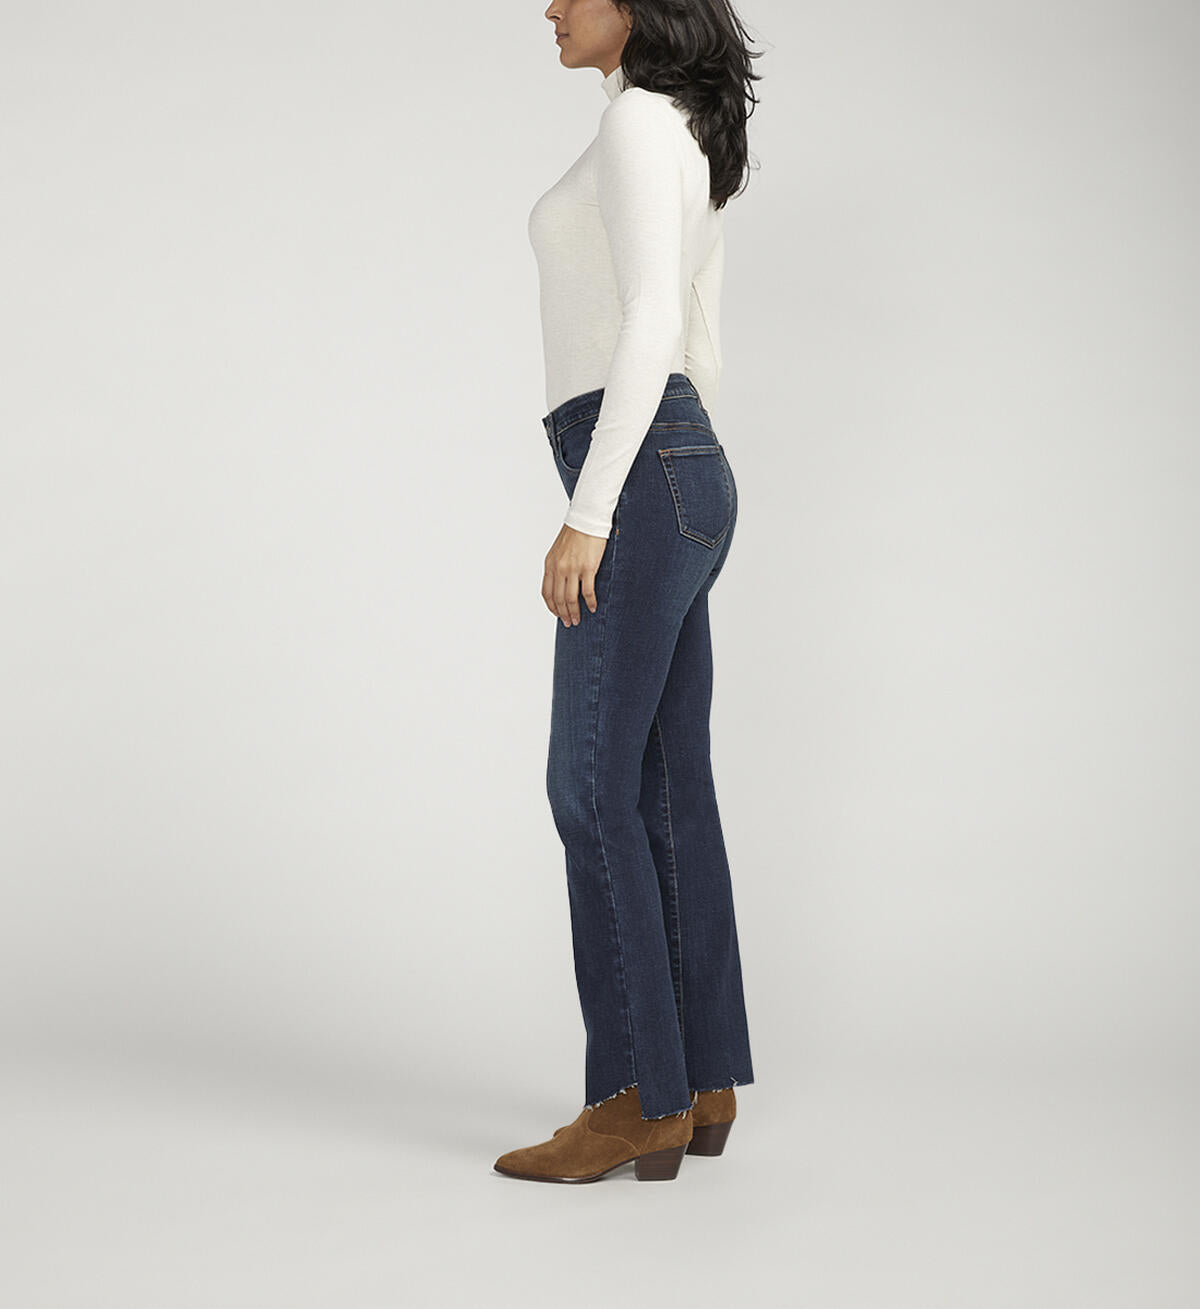 JAG Eloise Mid Rise Bootcut Jeans